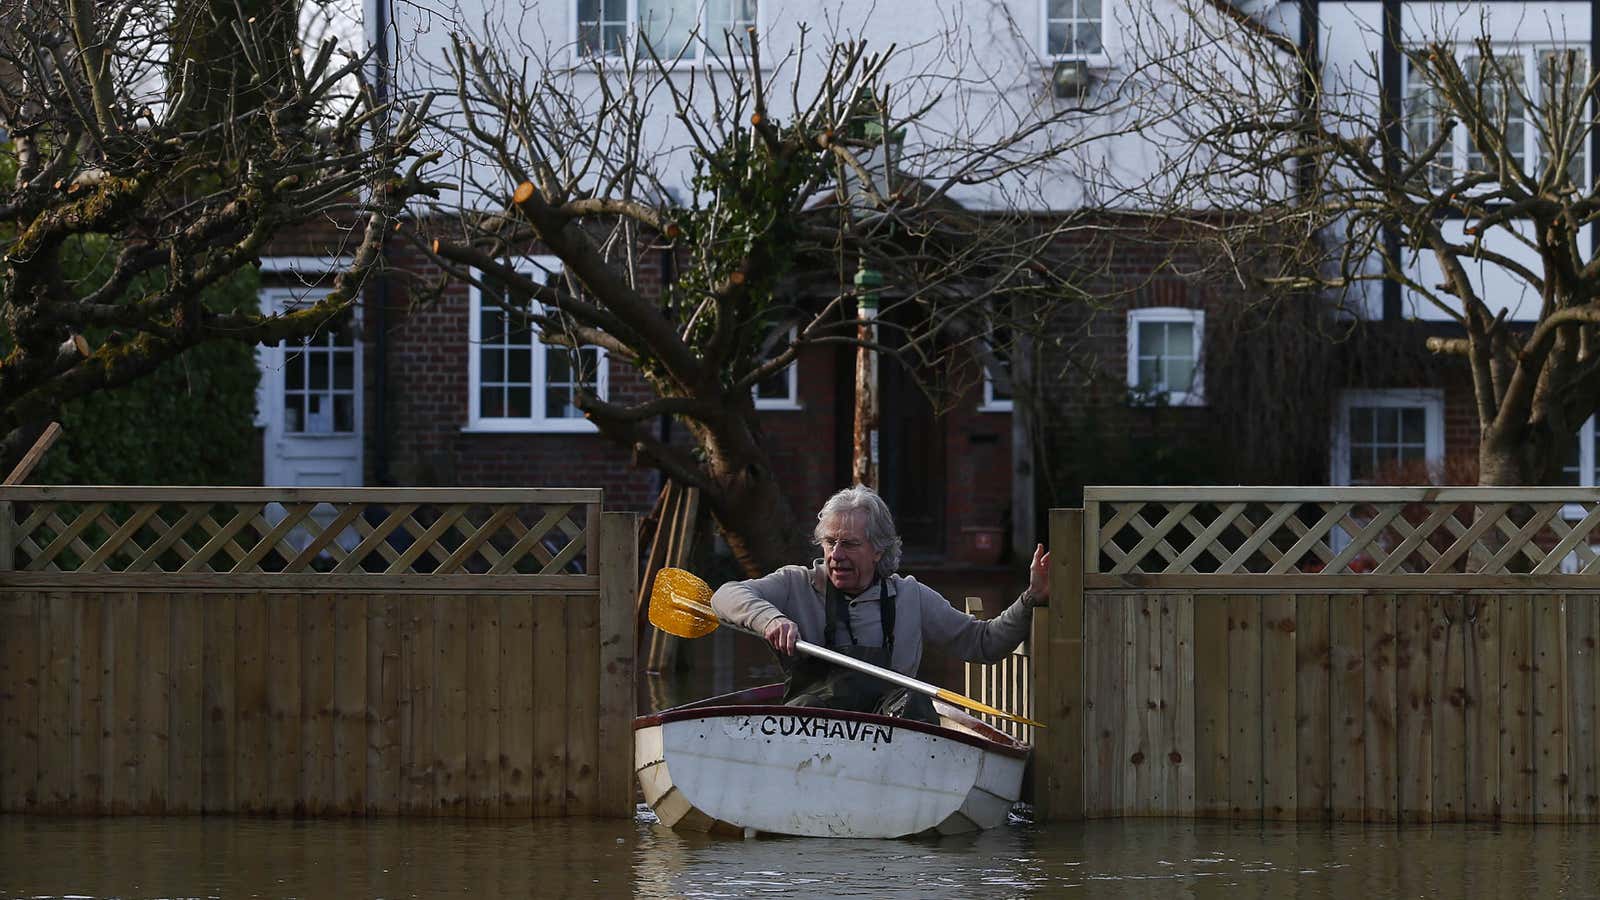 Huge floods like the ones that hit the UK last month will happen more often and become more destructive.